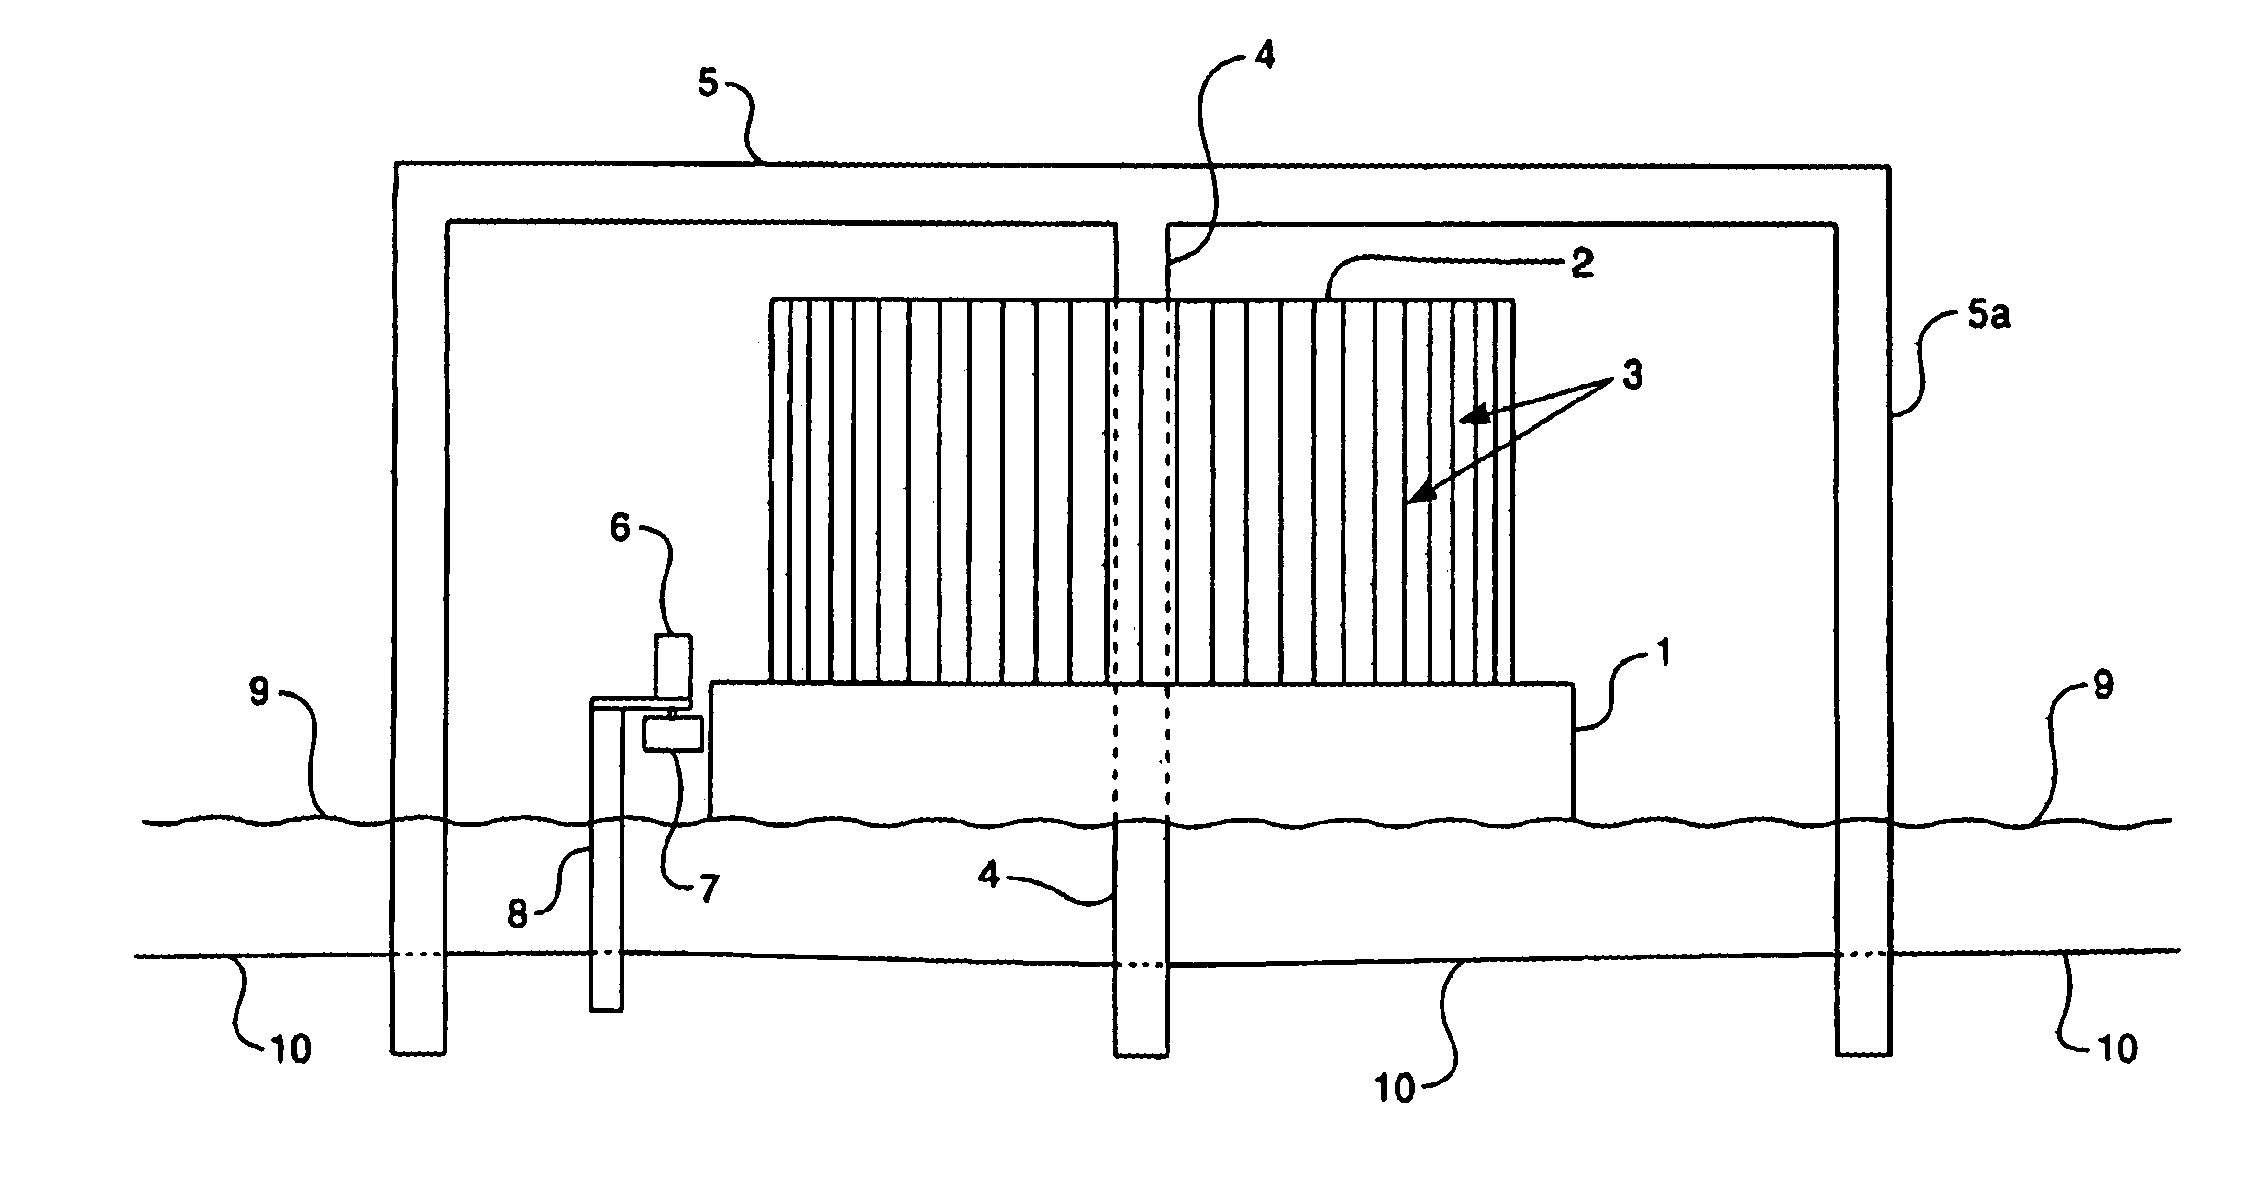 Reduced friction wind turbine apparatus and method